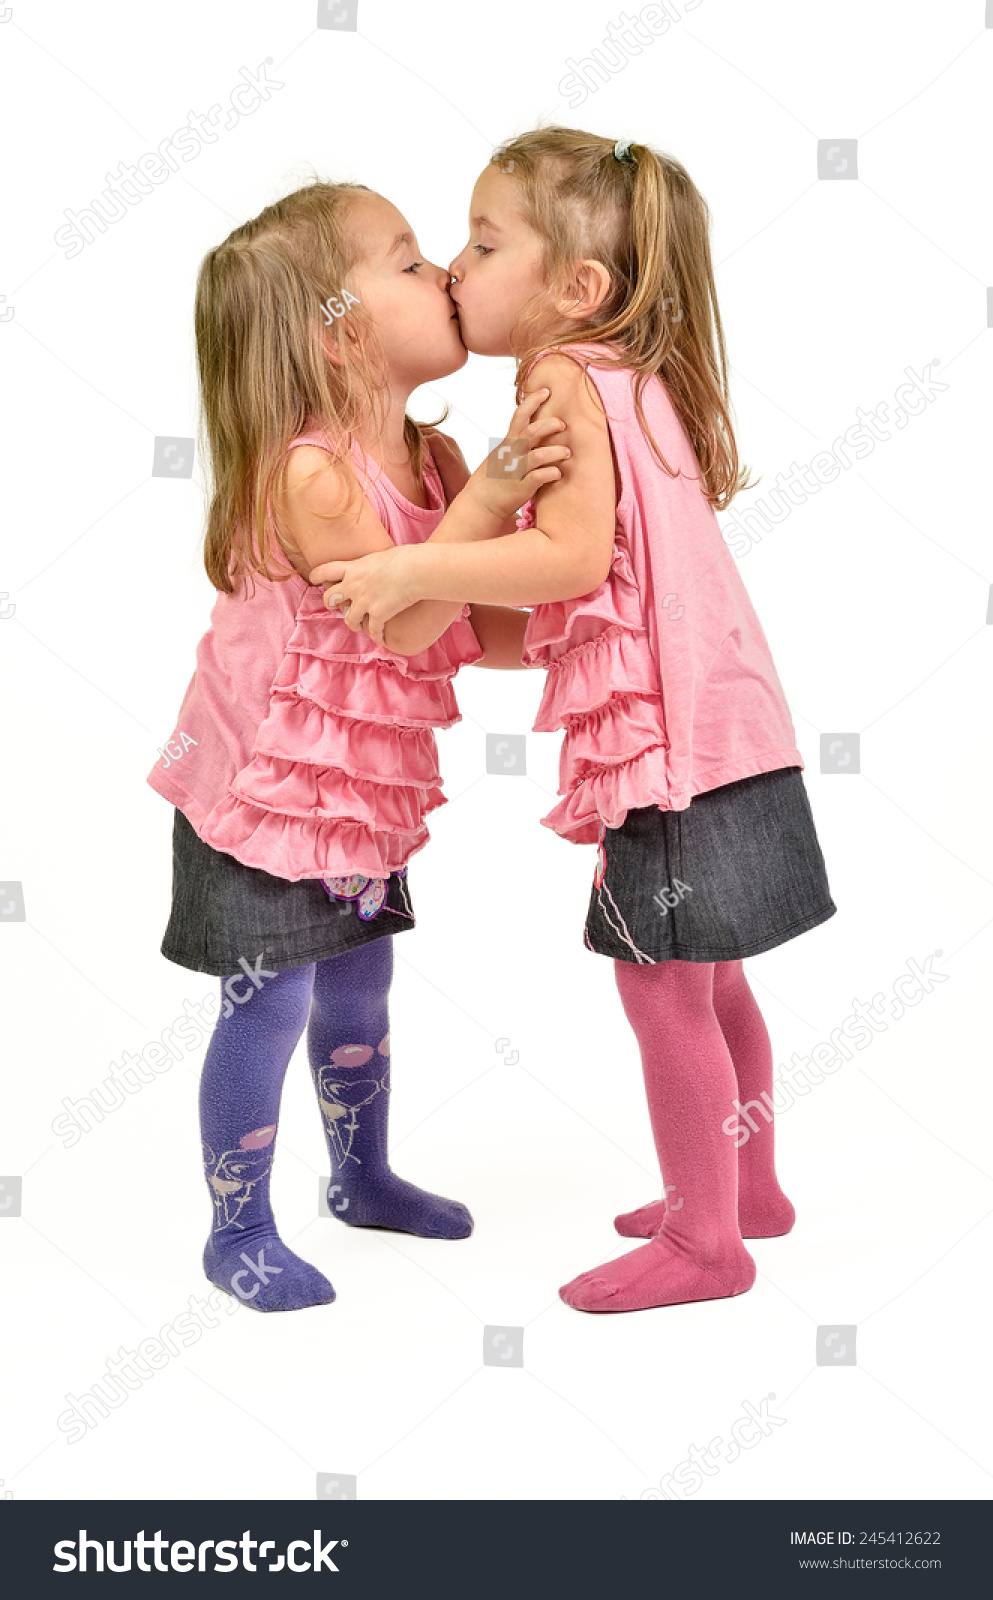 aaron shaddick recommends twin girls making out pic